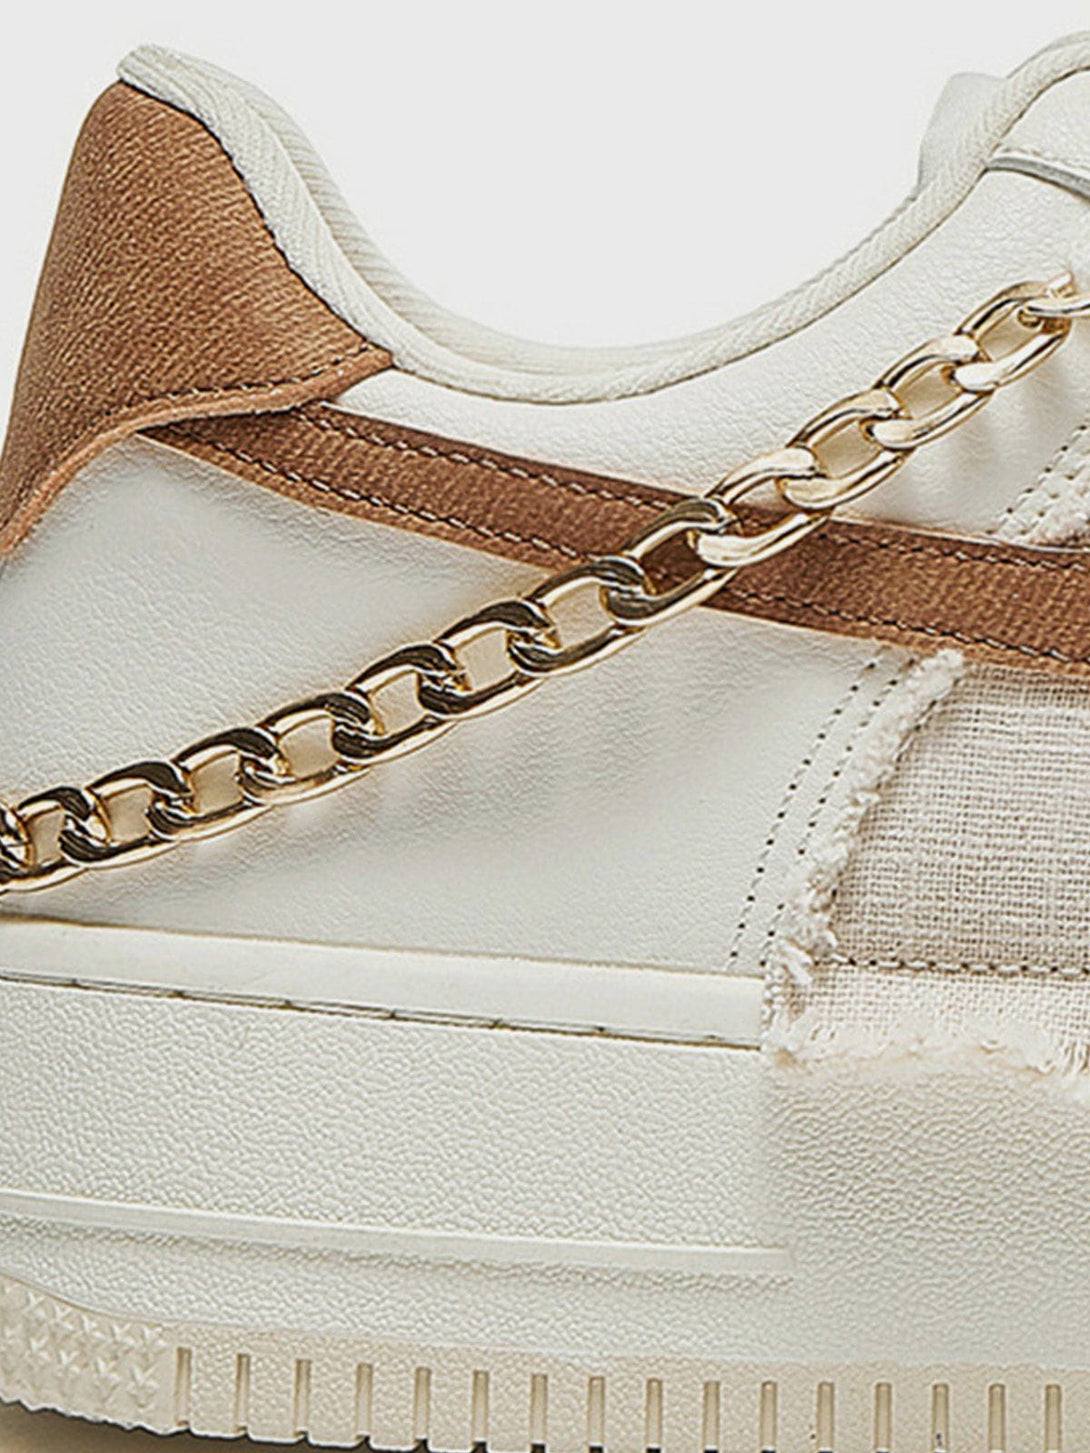 Levefly - Cross Graphic Chain Design Raw Edge Casual Shoes - Streetwear Fashion - levefly.com